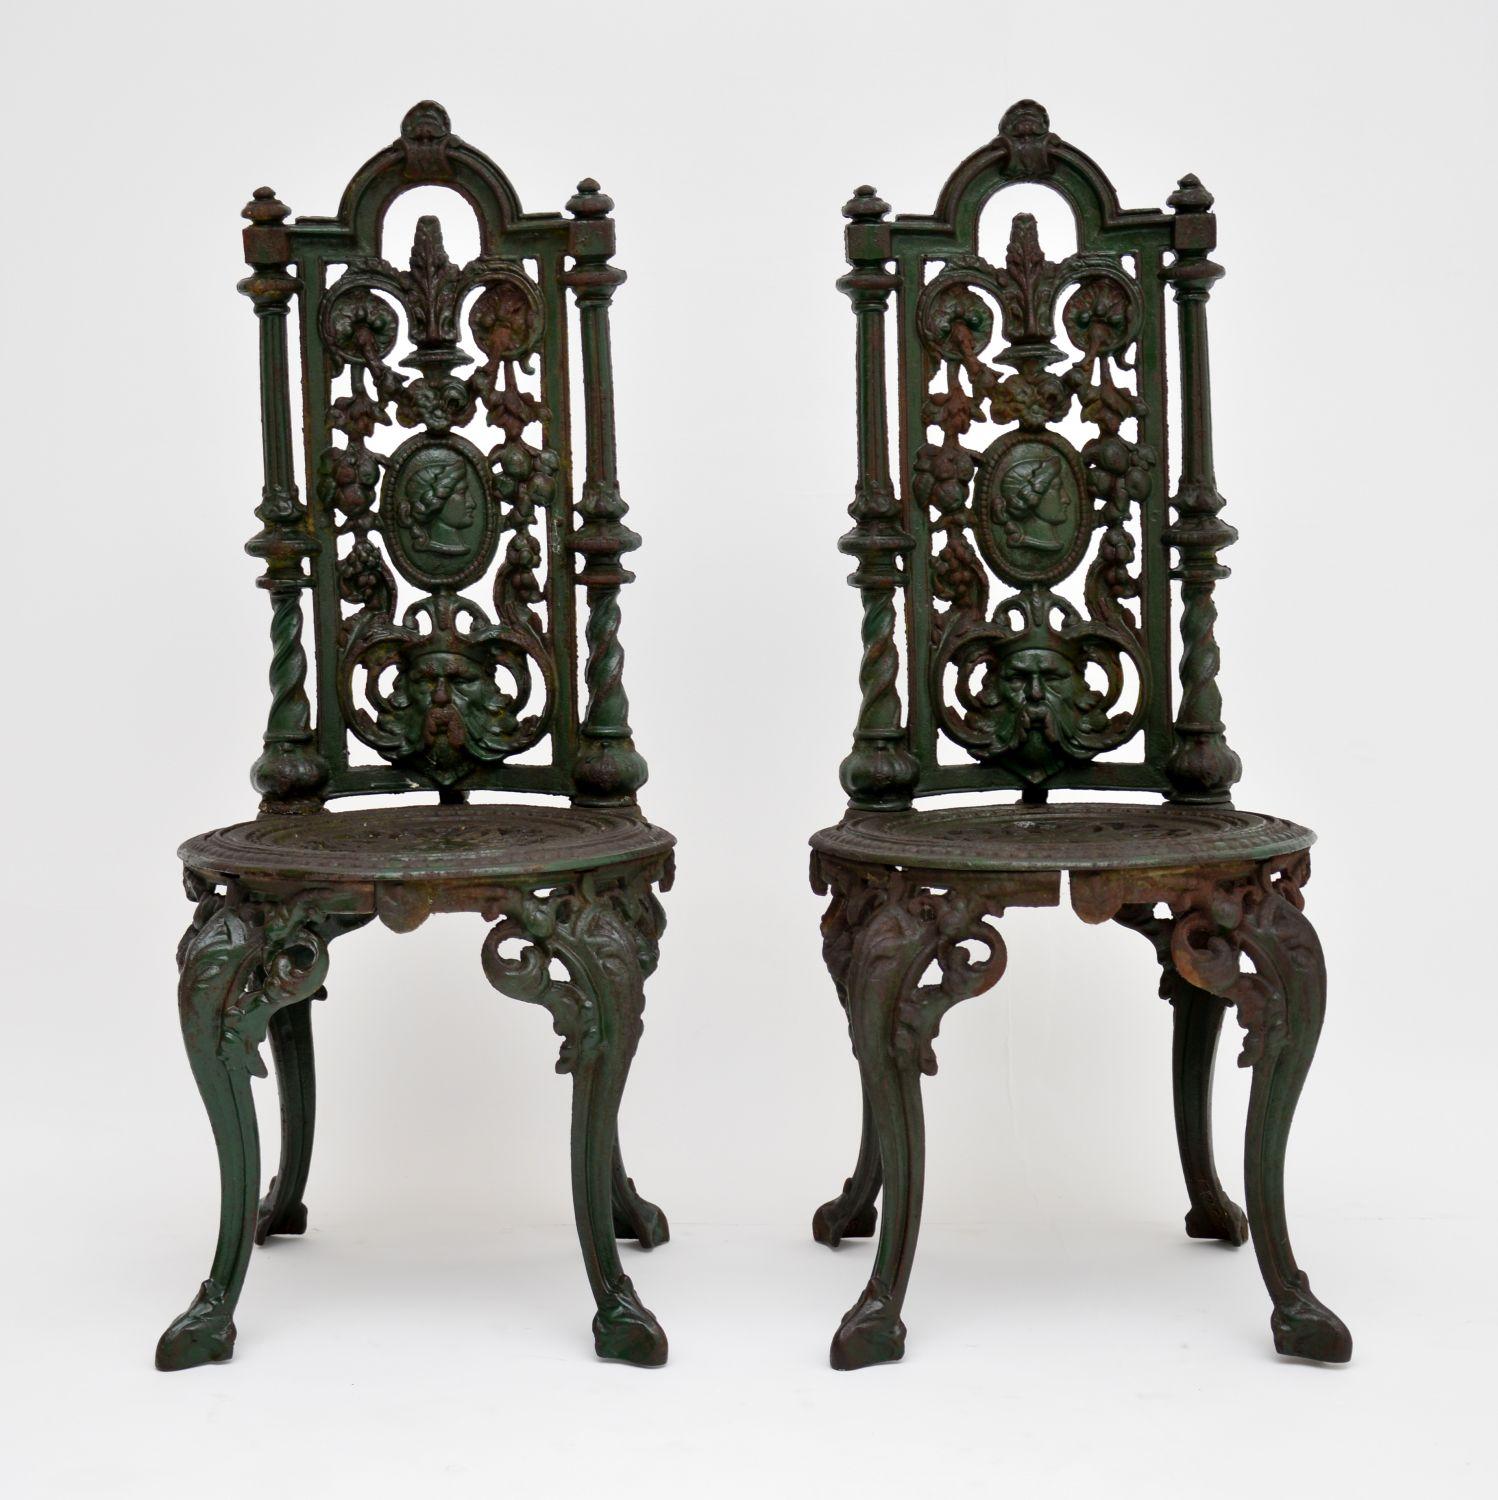 Pair of antique Victorian cast iron garden chairs in good original condition and with many fine details. They are still showing the original green paint and have weathered a lot over the years, so have a nice distressed look now. These chairs date